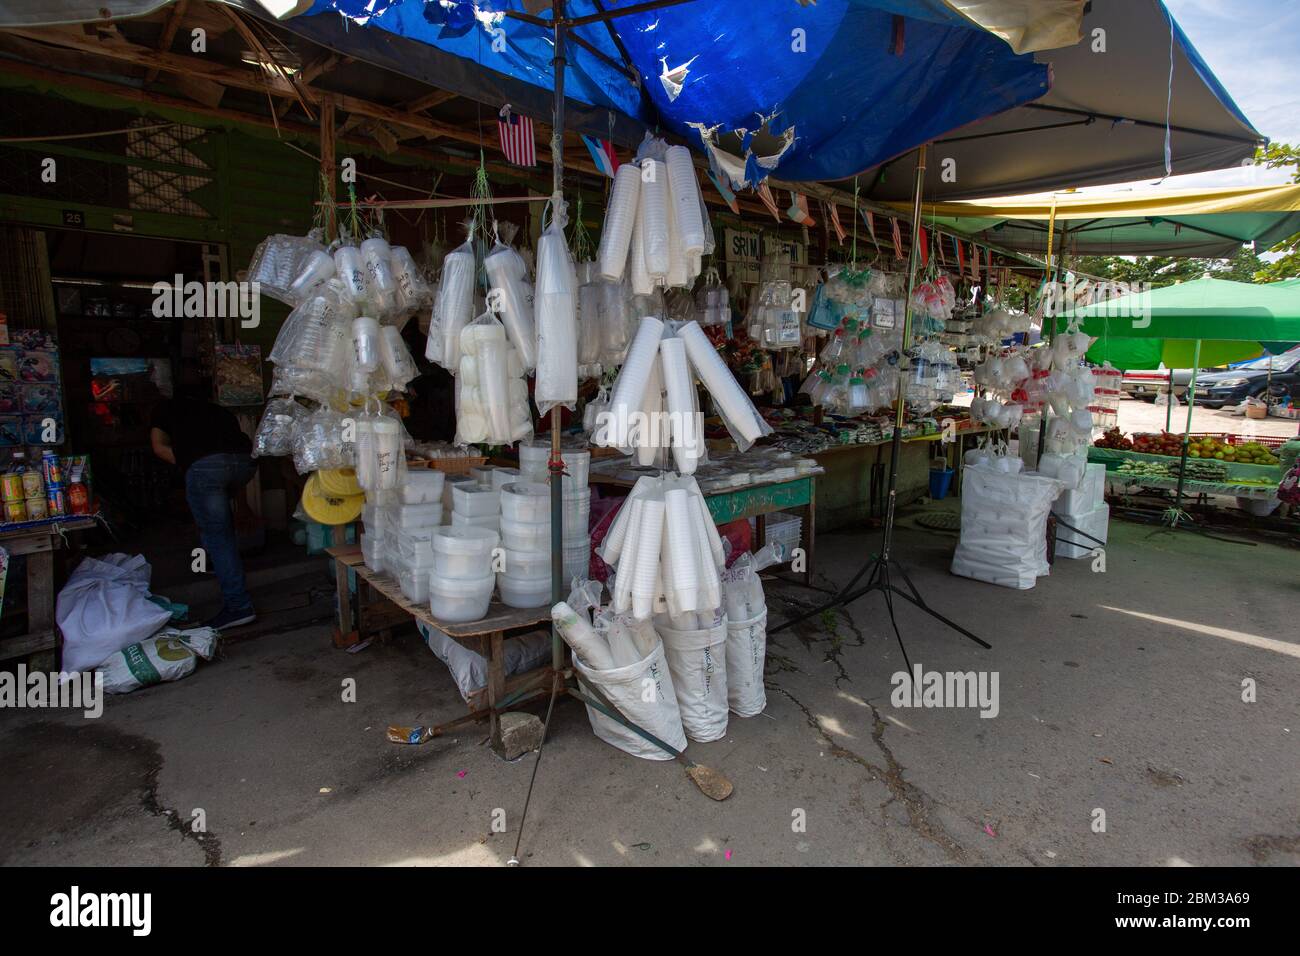 Tuaran, Malaysia, 6 May 2020 - Asian stall in Tuaran town selling plastic tupperware and other household items Stock Photo